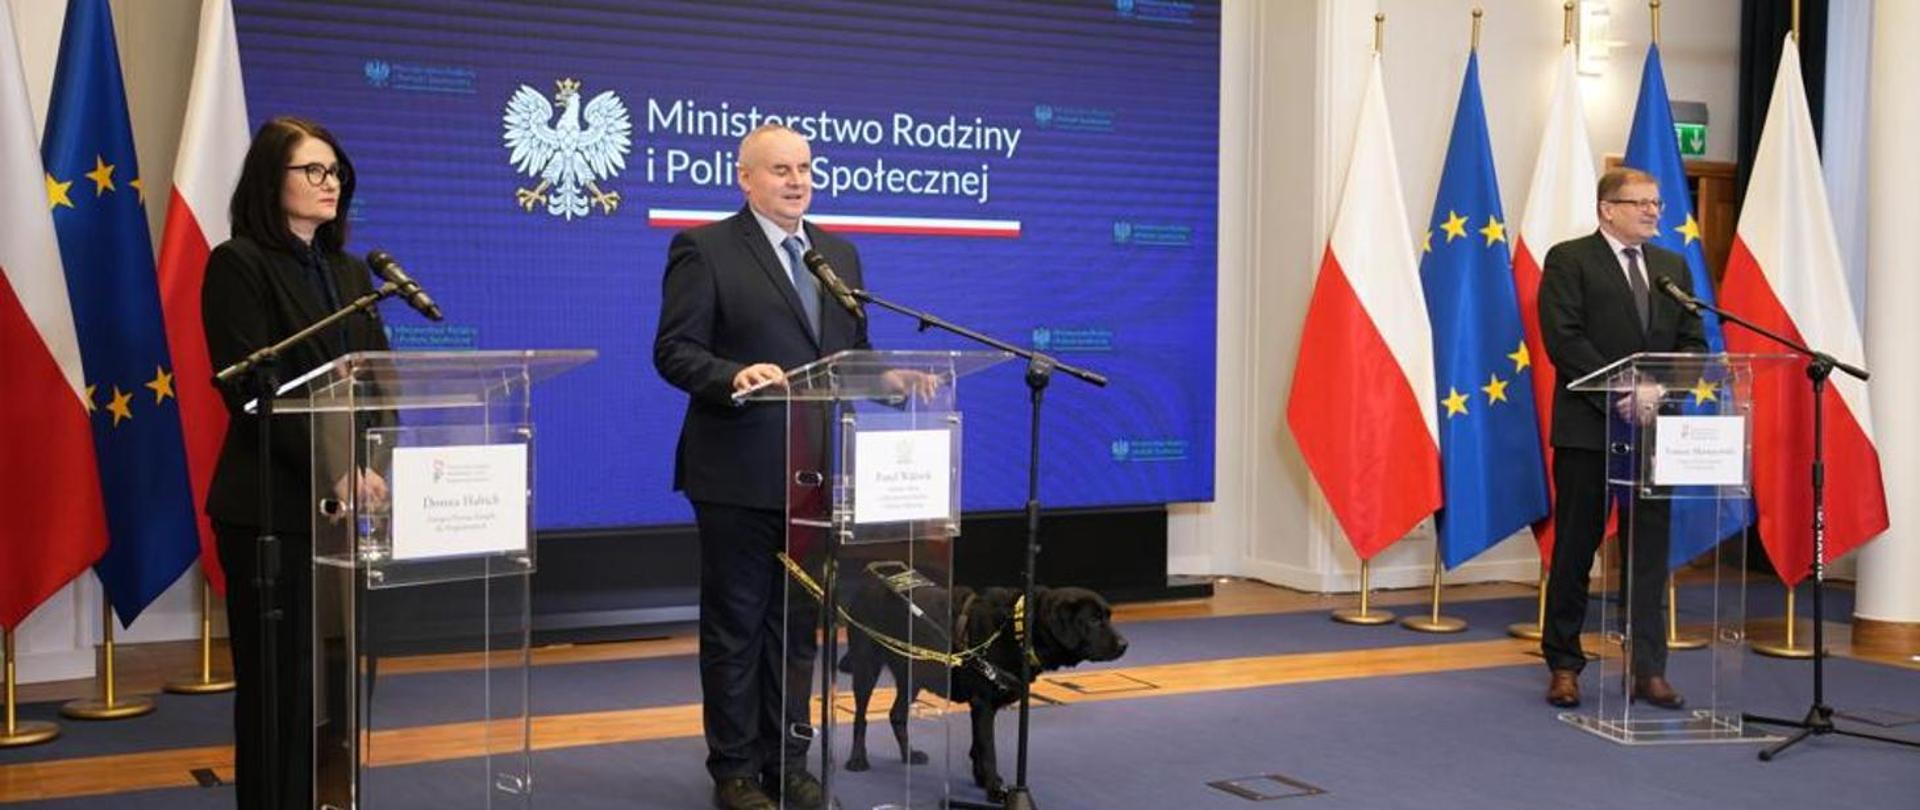 PLN 1 billion for equipment, flats and cars for persons with disabilities